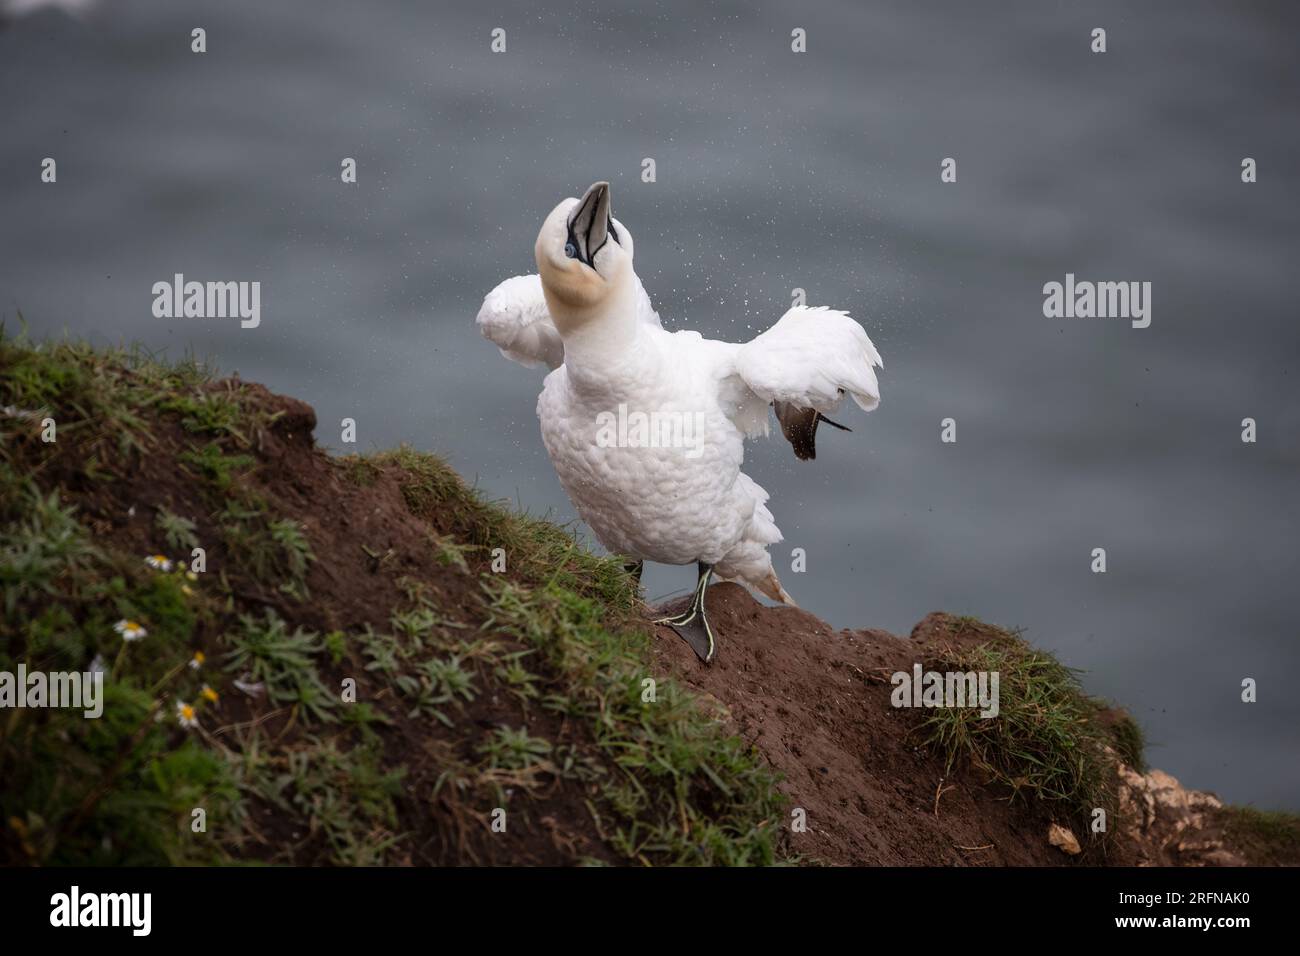 Northern Gannet Morus bassanus shaking raindrops off its white plumage on the cliffs at Bempton in East Yorkshire U.K. Stock Photo